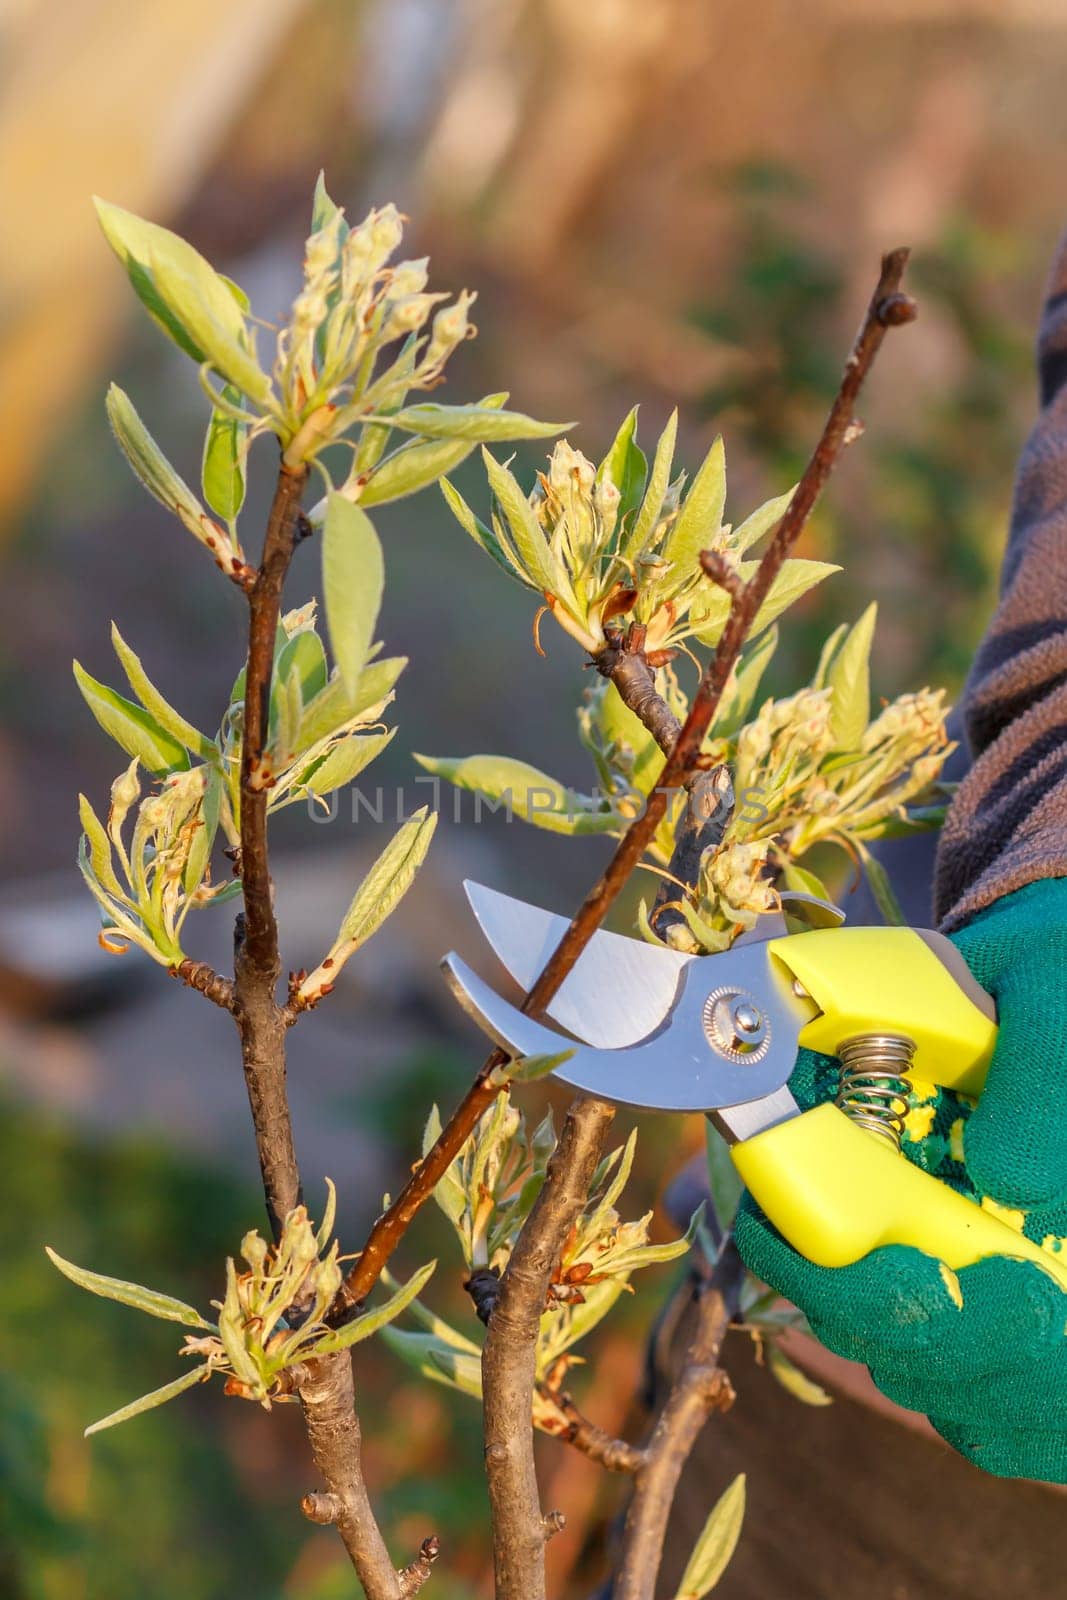 Female farmer look after the garden. Spring pruning of fruit tree. Woman with pruner shears the tips of pear tree.